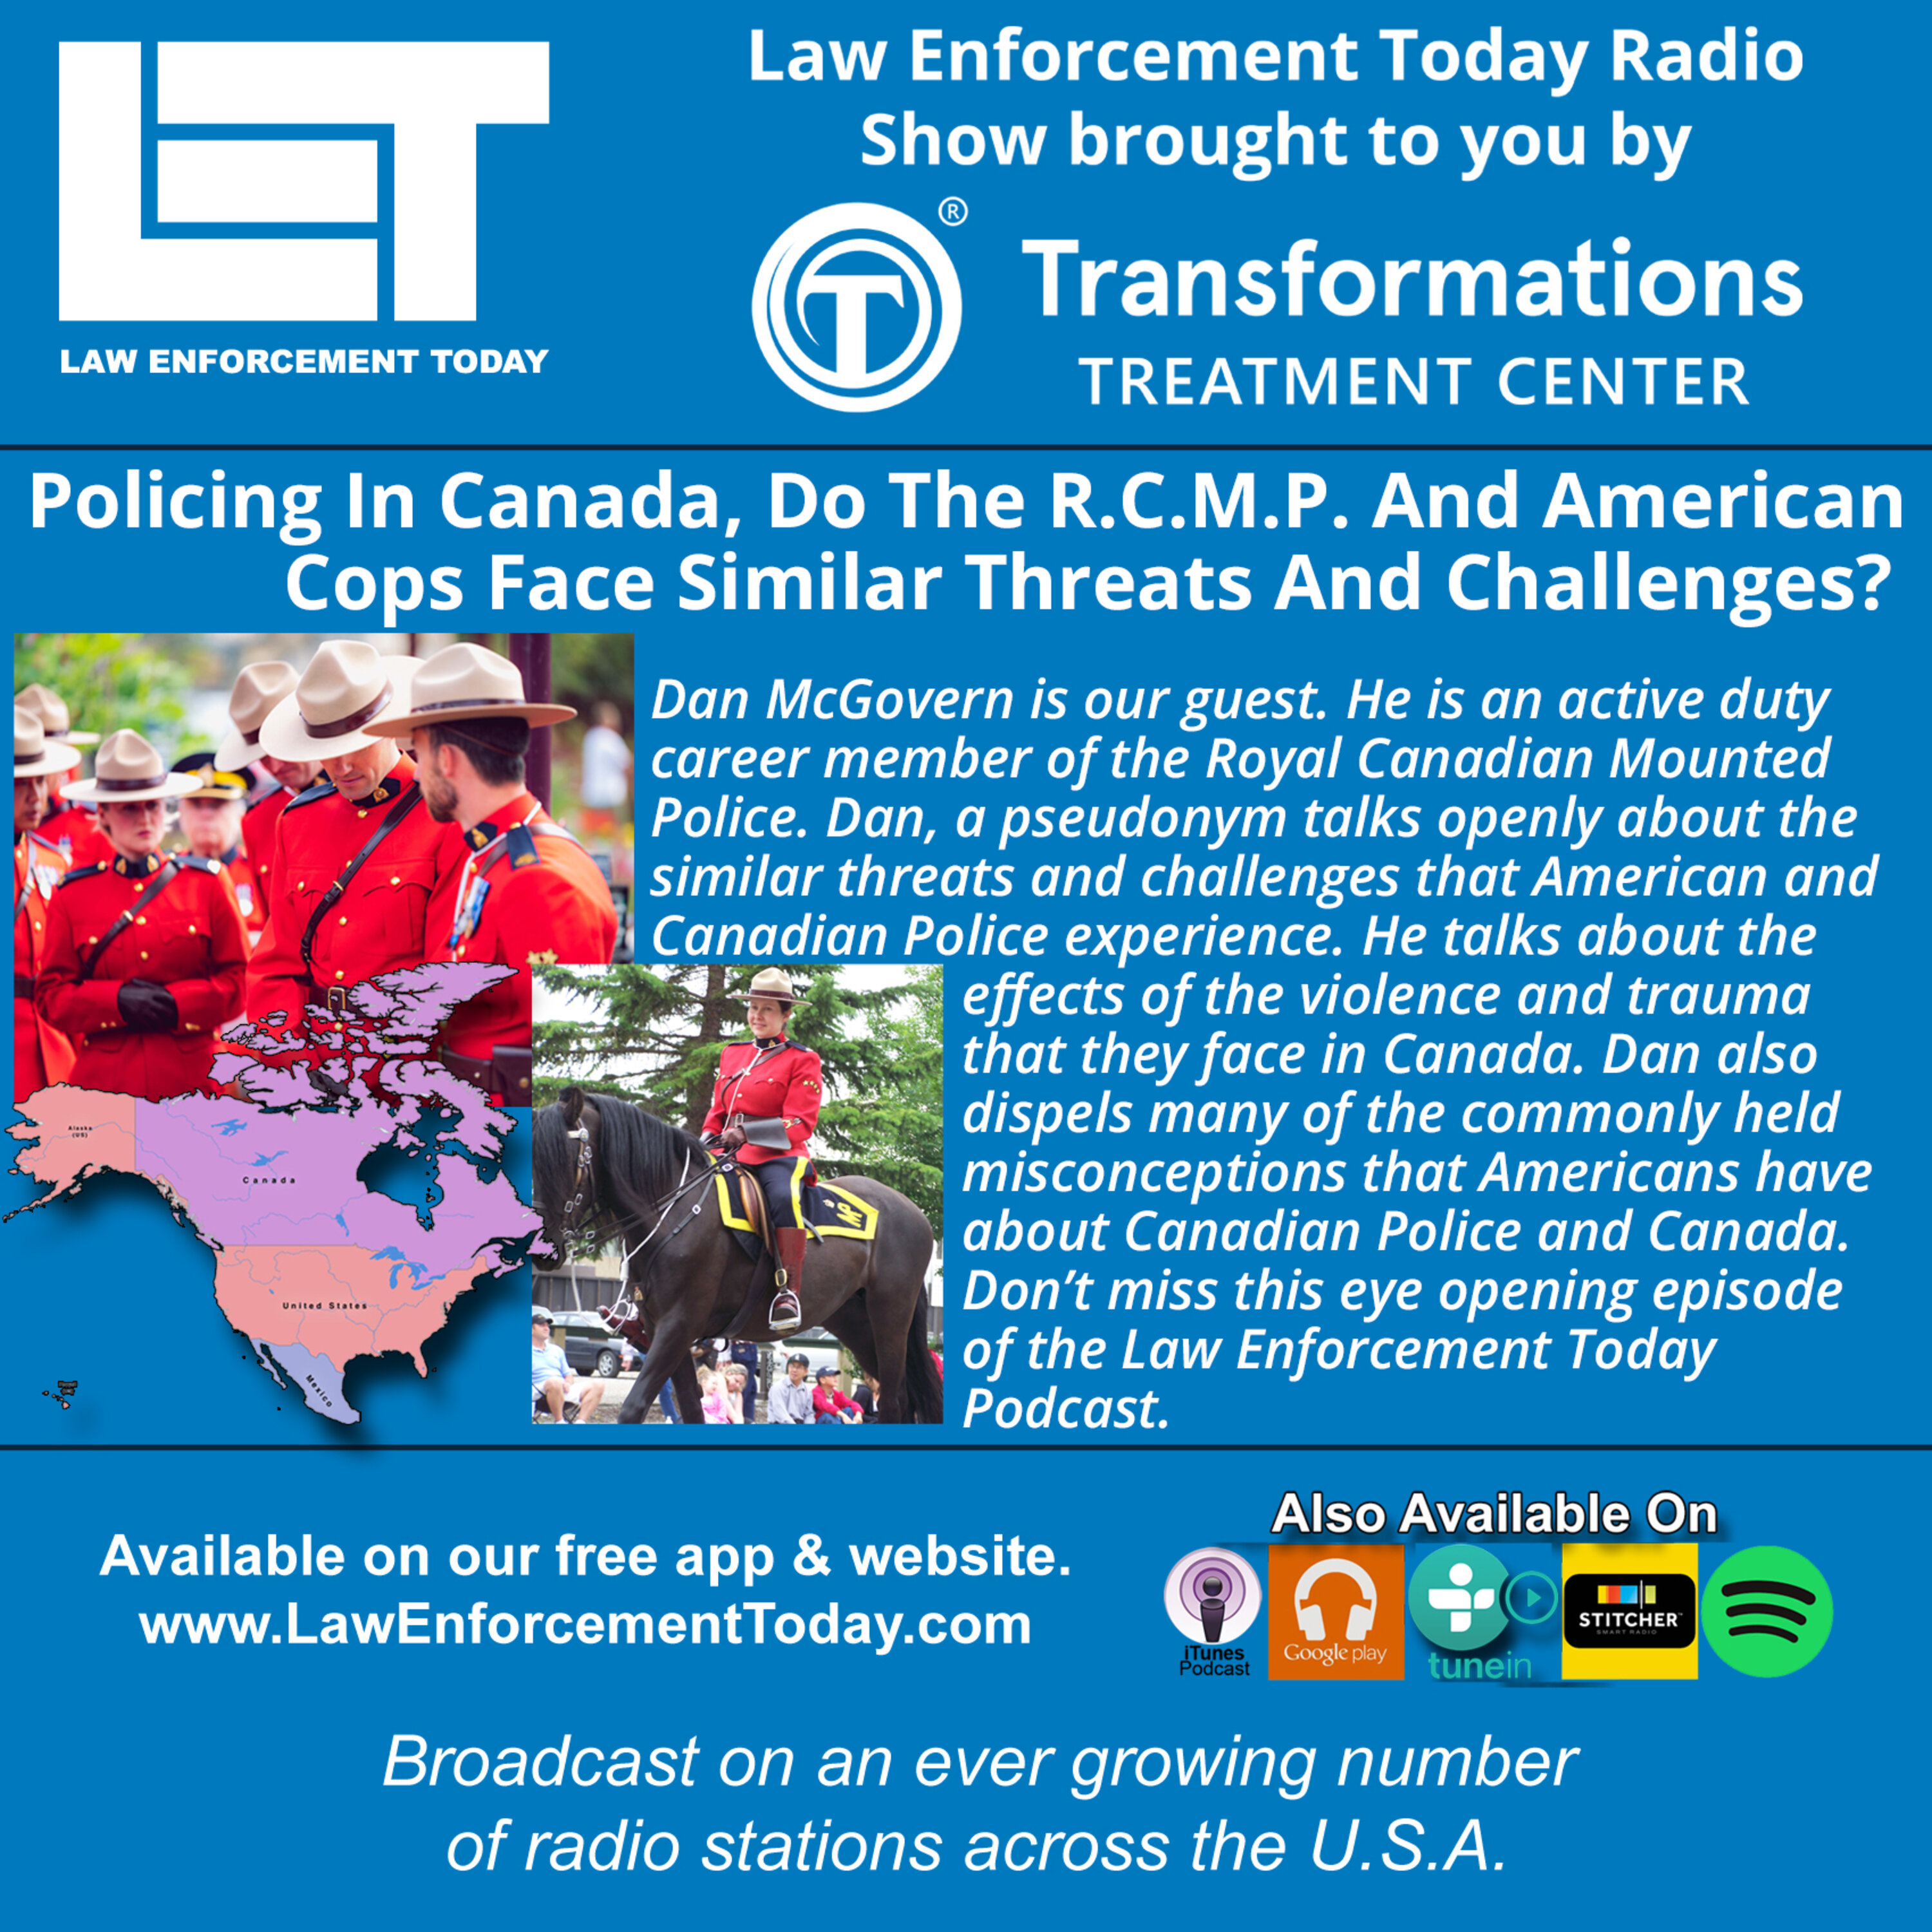 S4E55: Policing In Canada, Do The R.C.M.P.  And American Cops Face Similar Threats And Challenges?